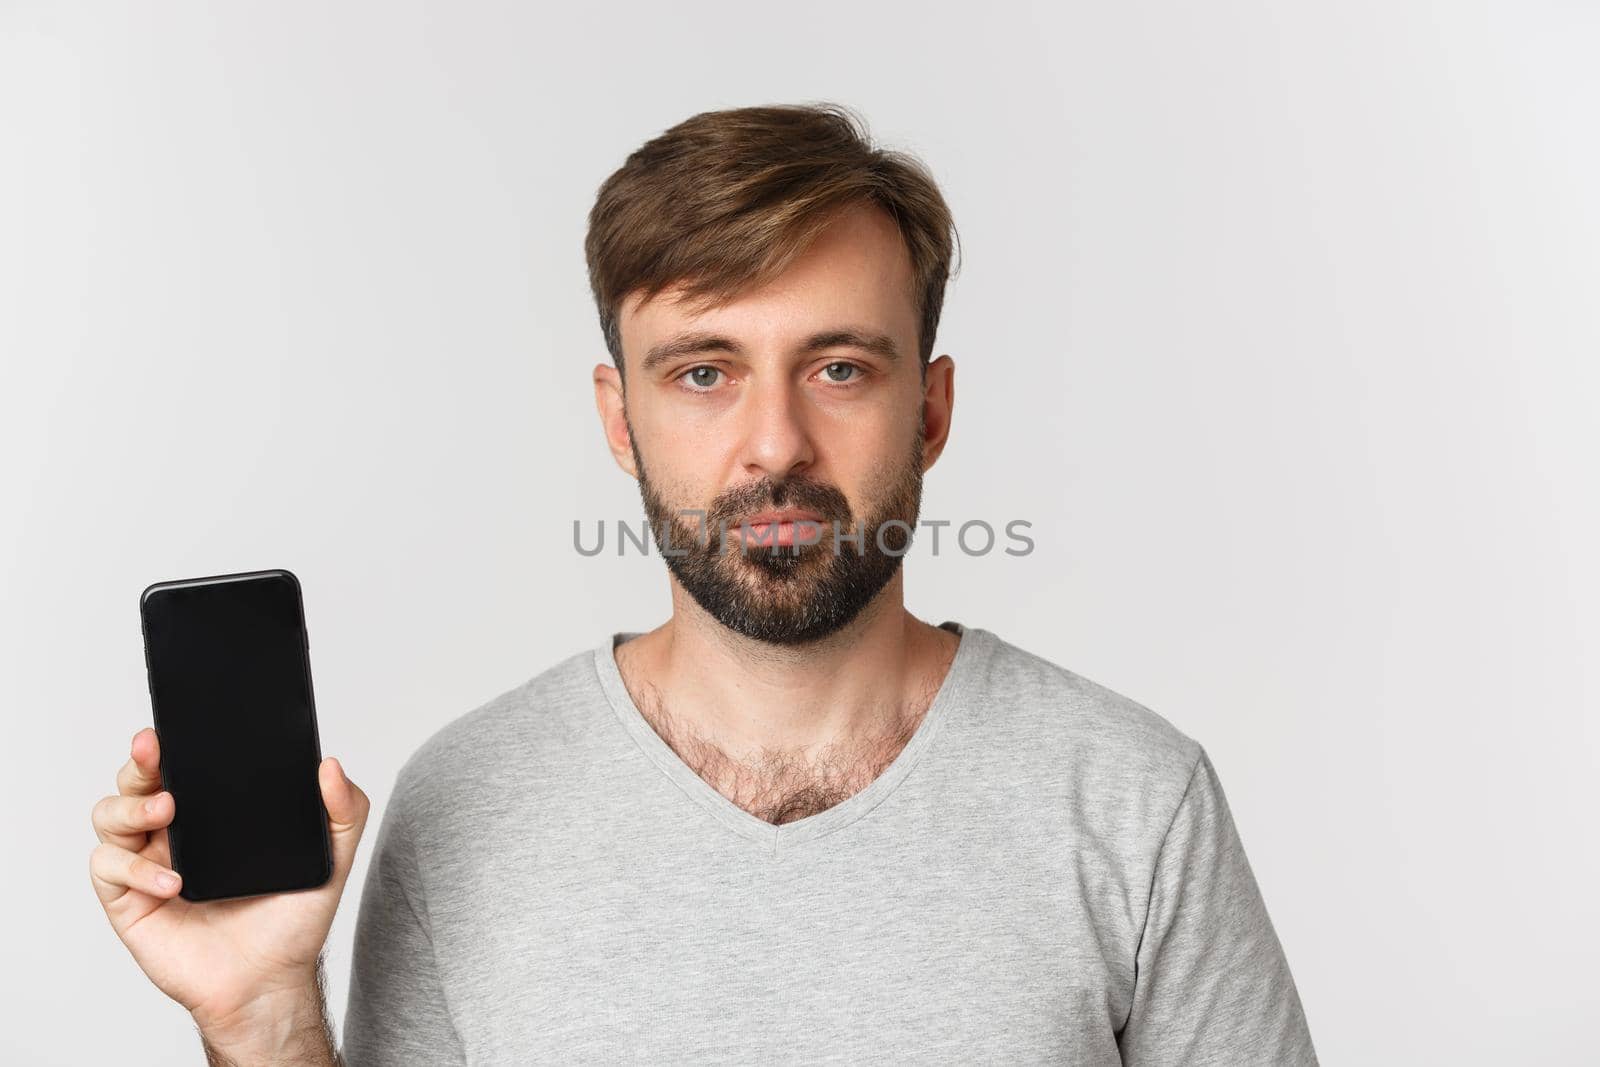 Close-up of tired caucasian guy in gray t-shirt, looking exhausted and showing smartphone screen, standing over white background.